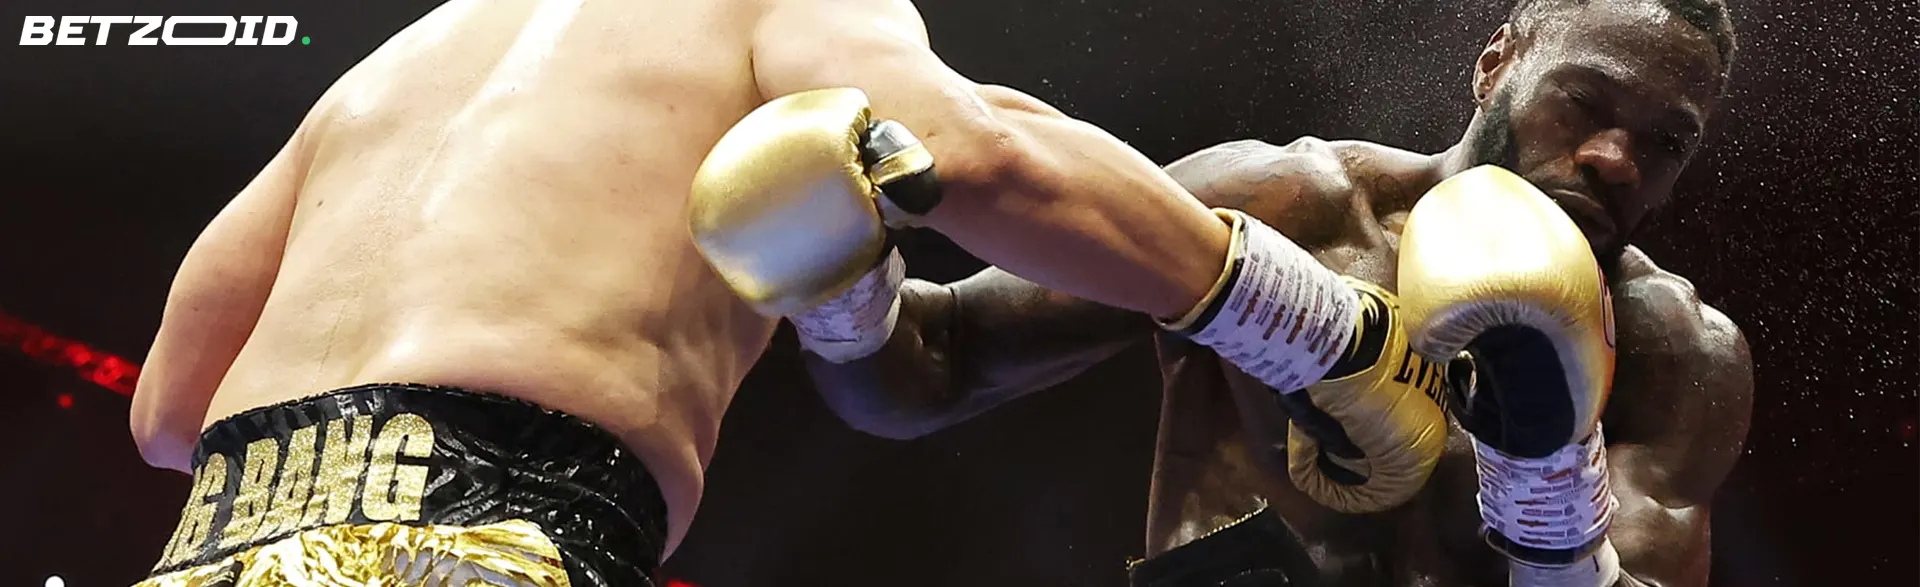 Boxers in action during a match, representing the dynamic sports events covered by Alberta betting sites.